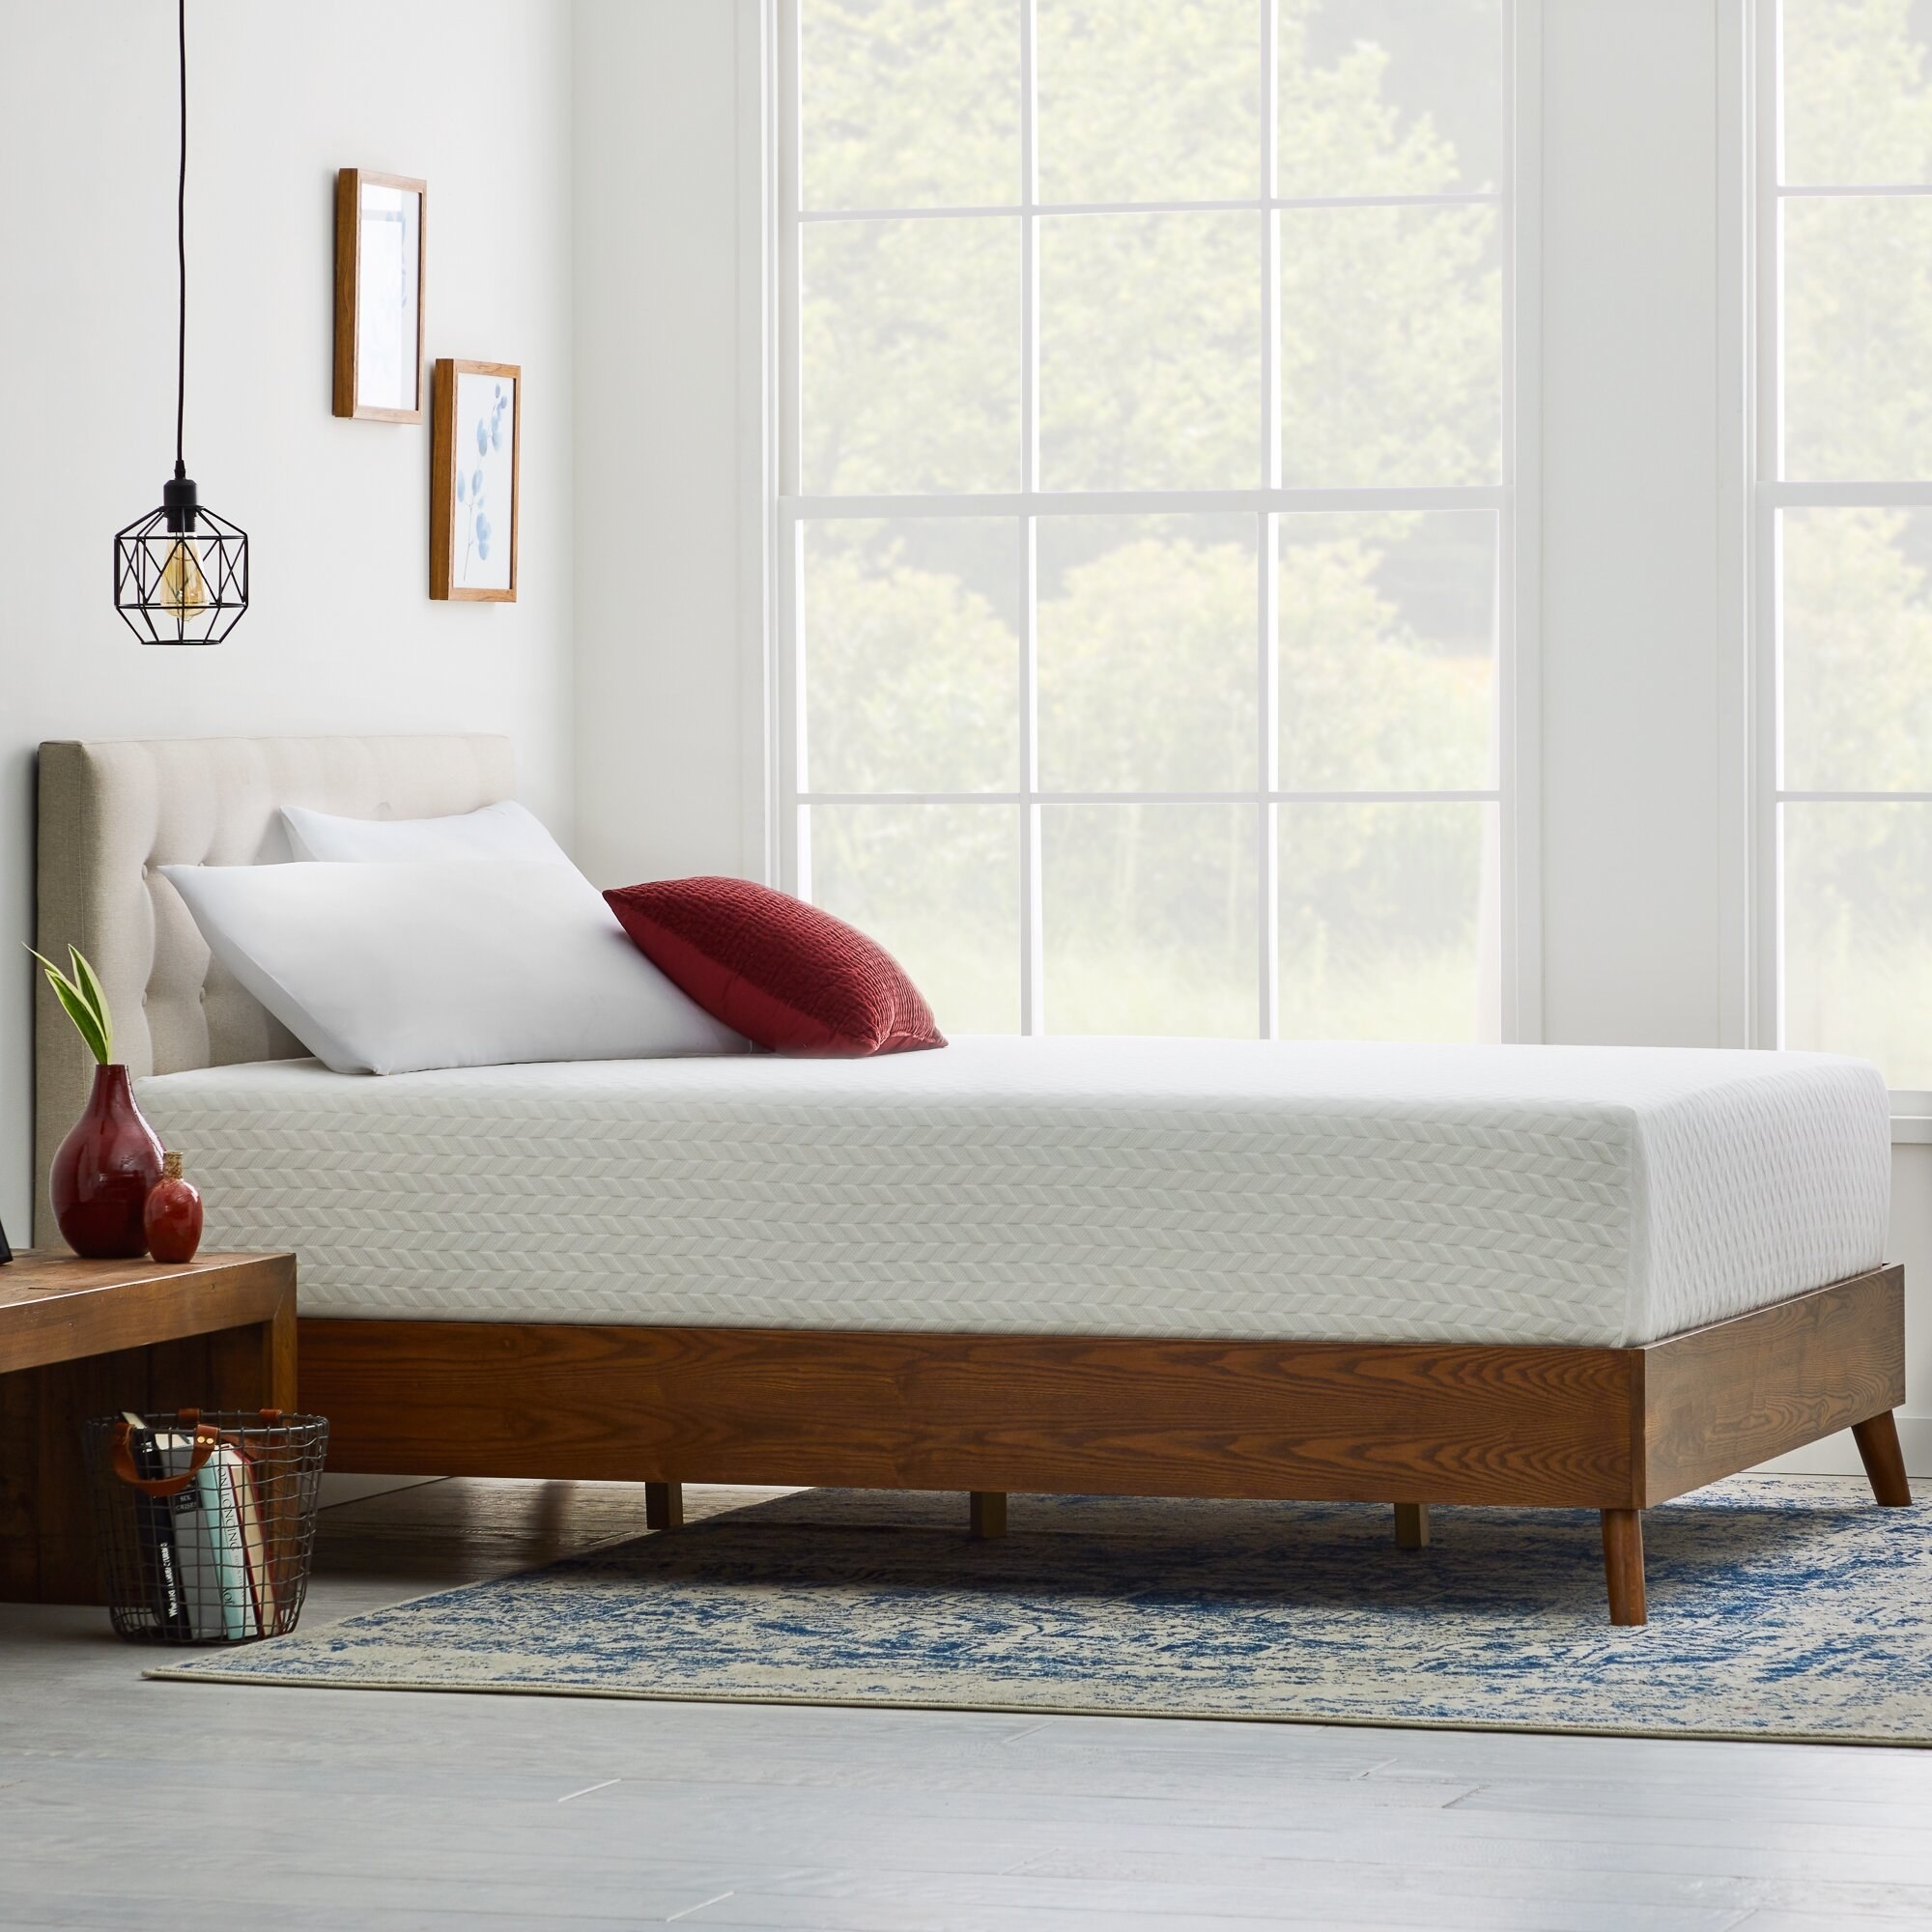 the mattress on a bed frame with white and red pillows stacked on top